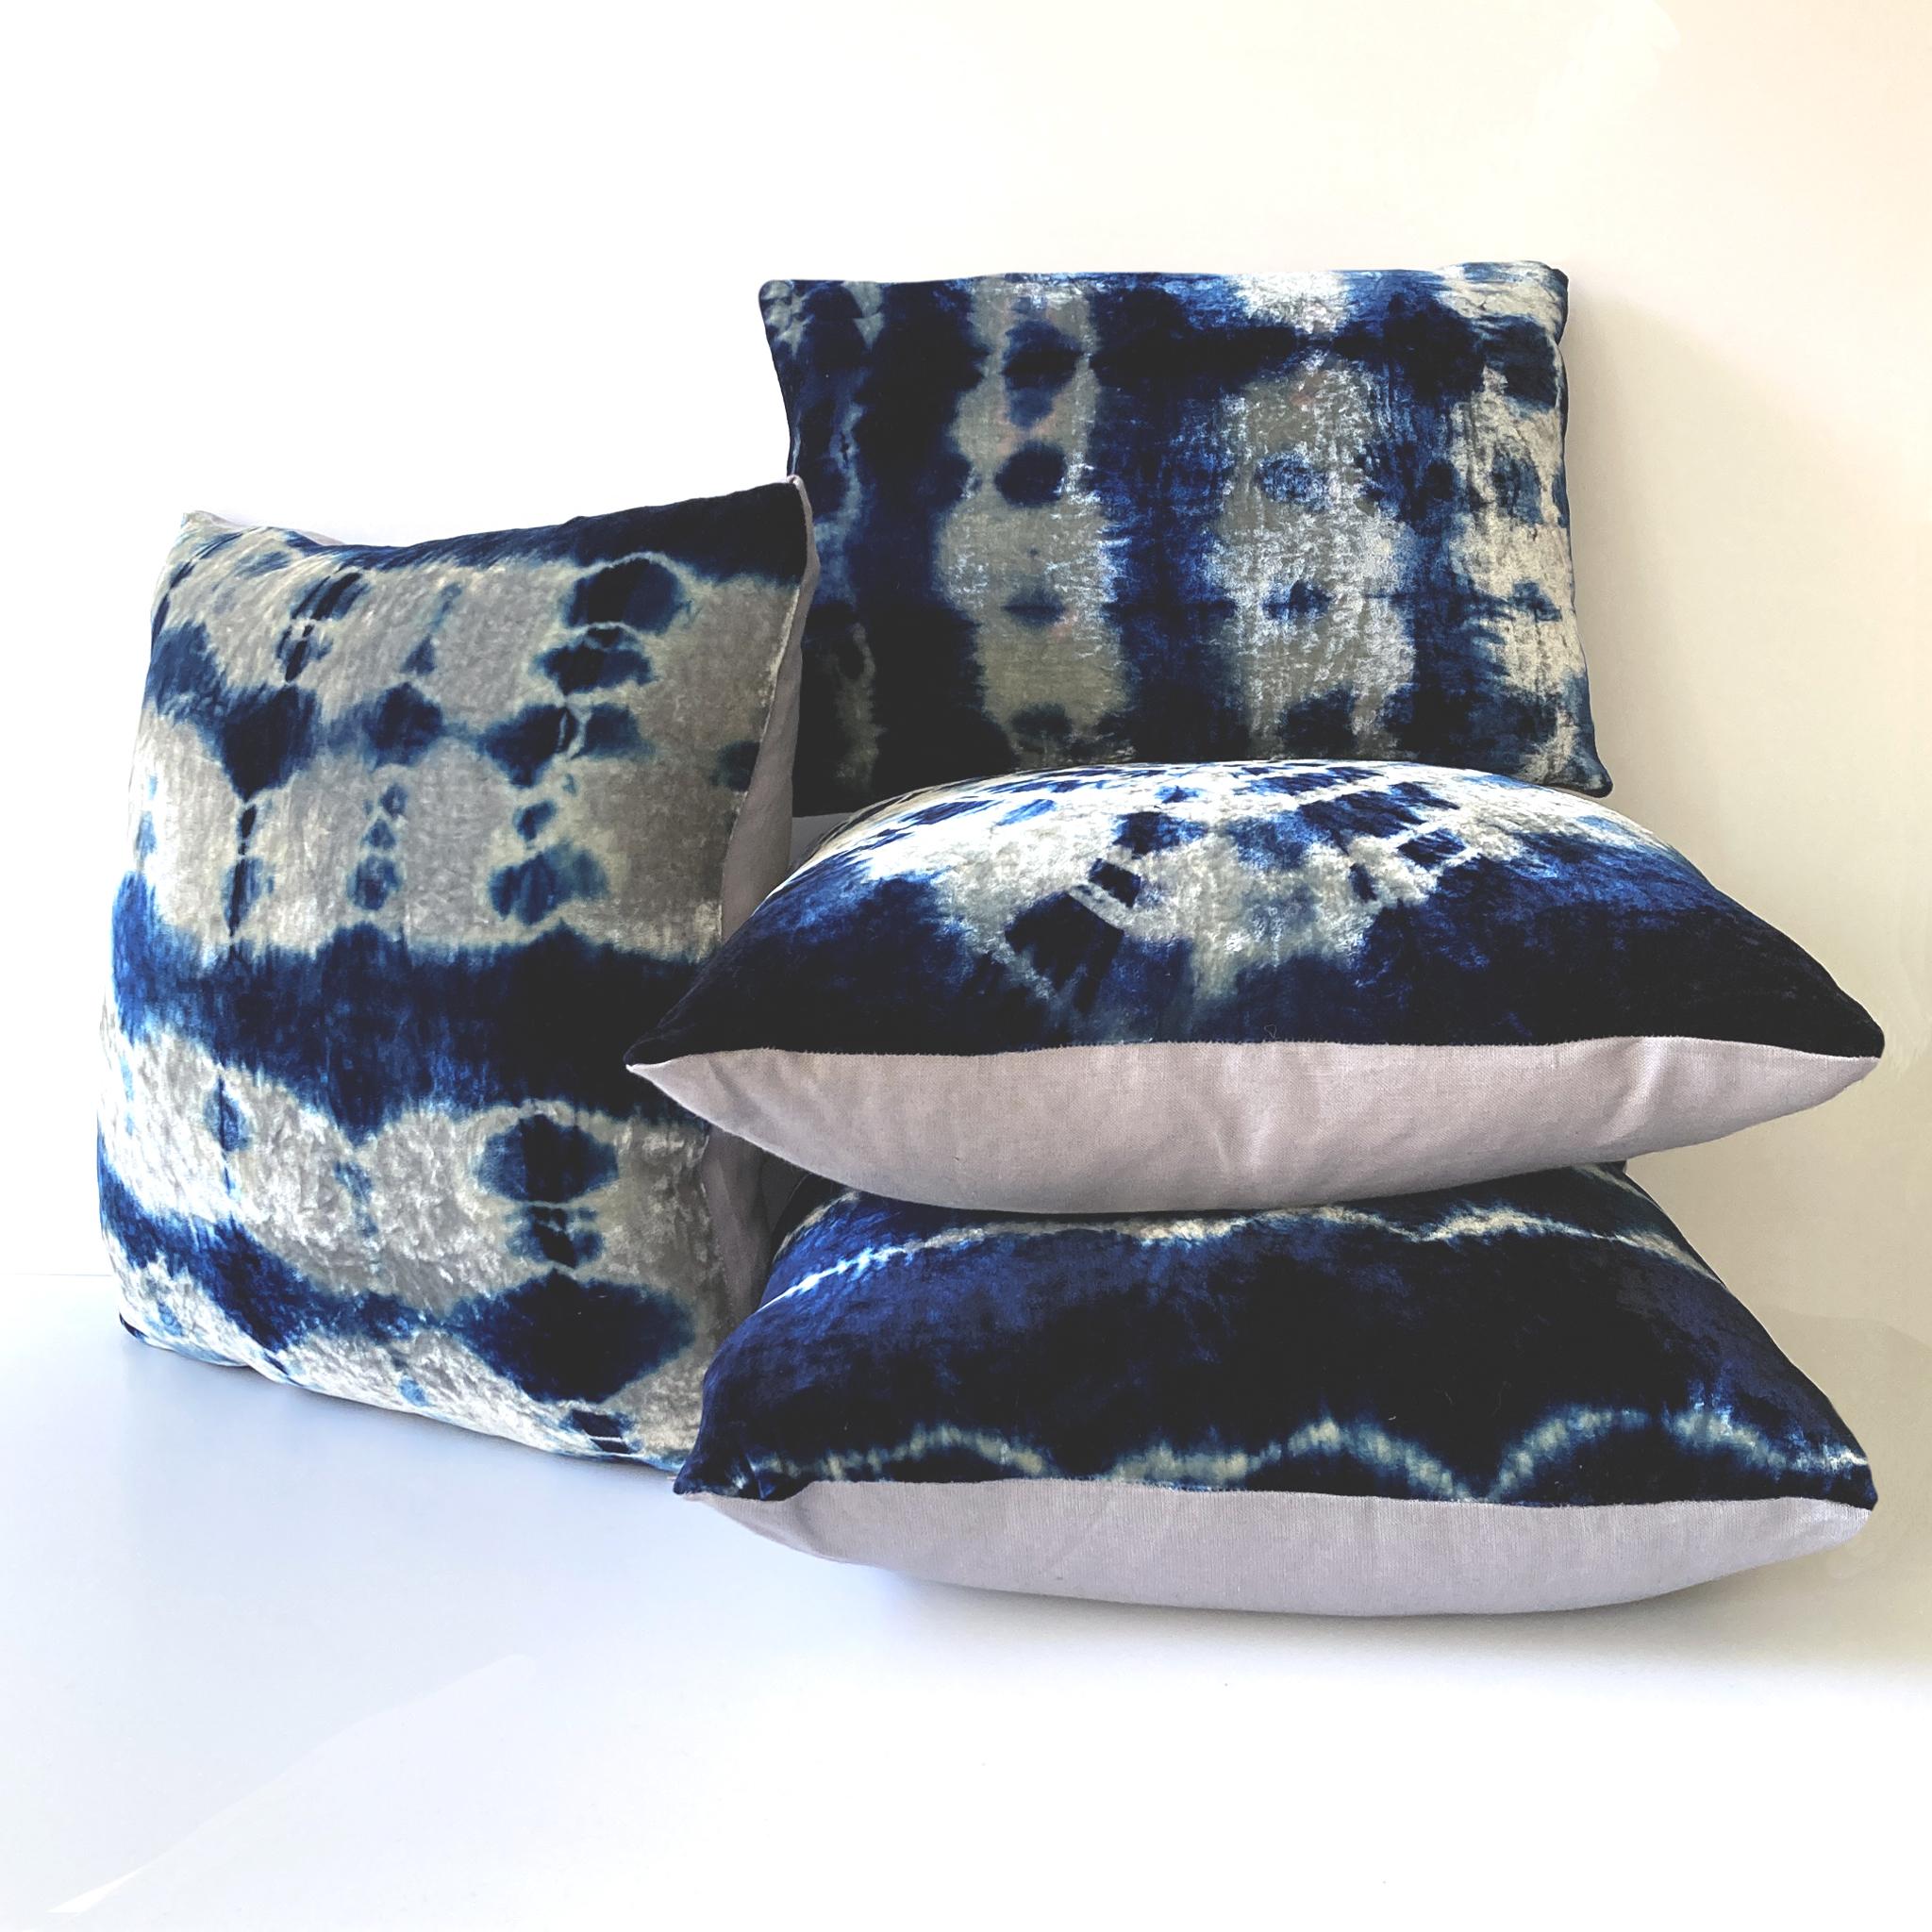 Silver velvet pillow dyed with indigo in Morse pattern with gray linen backing. Hand-dyed and sewn in New York City, down pillow insert made locally in NYC. Pillow measures 12 x 16 inches. Each velvet pillow is hand made and one of a kind.

Custom